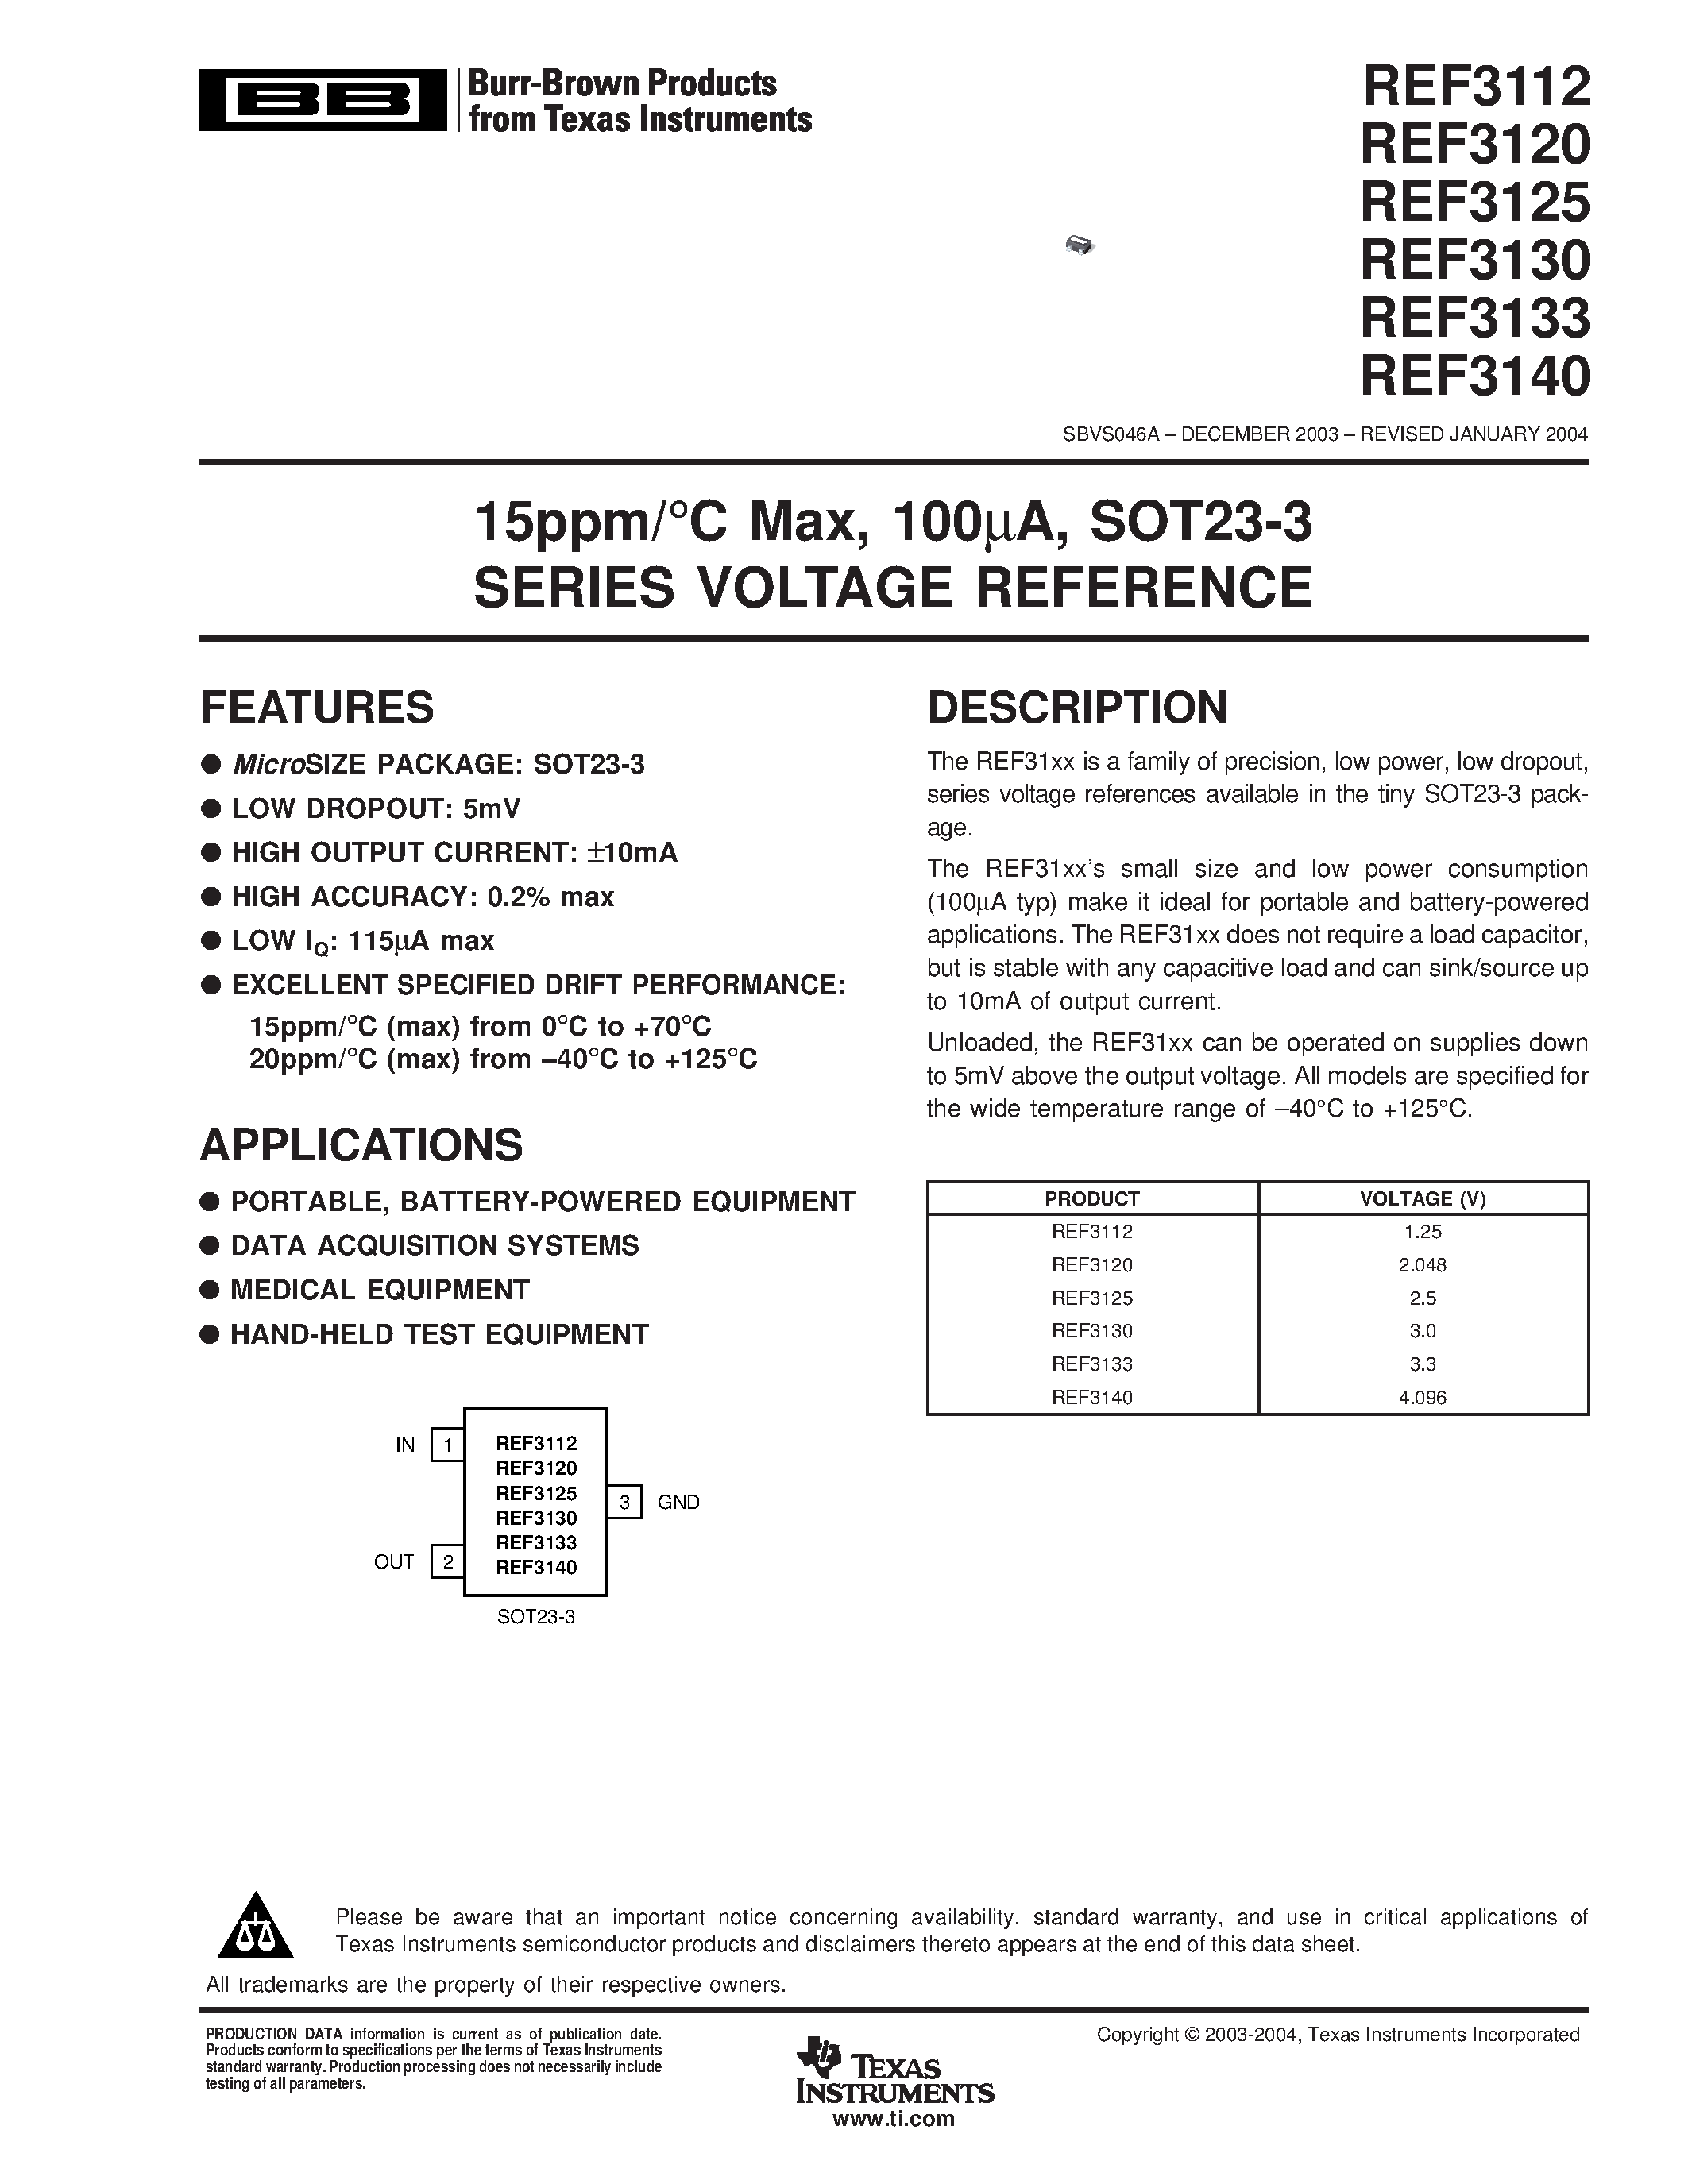 Datasheet REF3140AIDBZR - 15ppm/C Max/ 100UA/ SOT23-3 SERIES VOLTAGE REFERENCE page 1